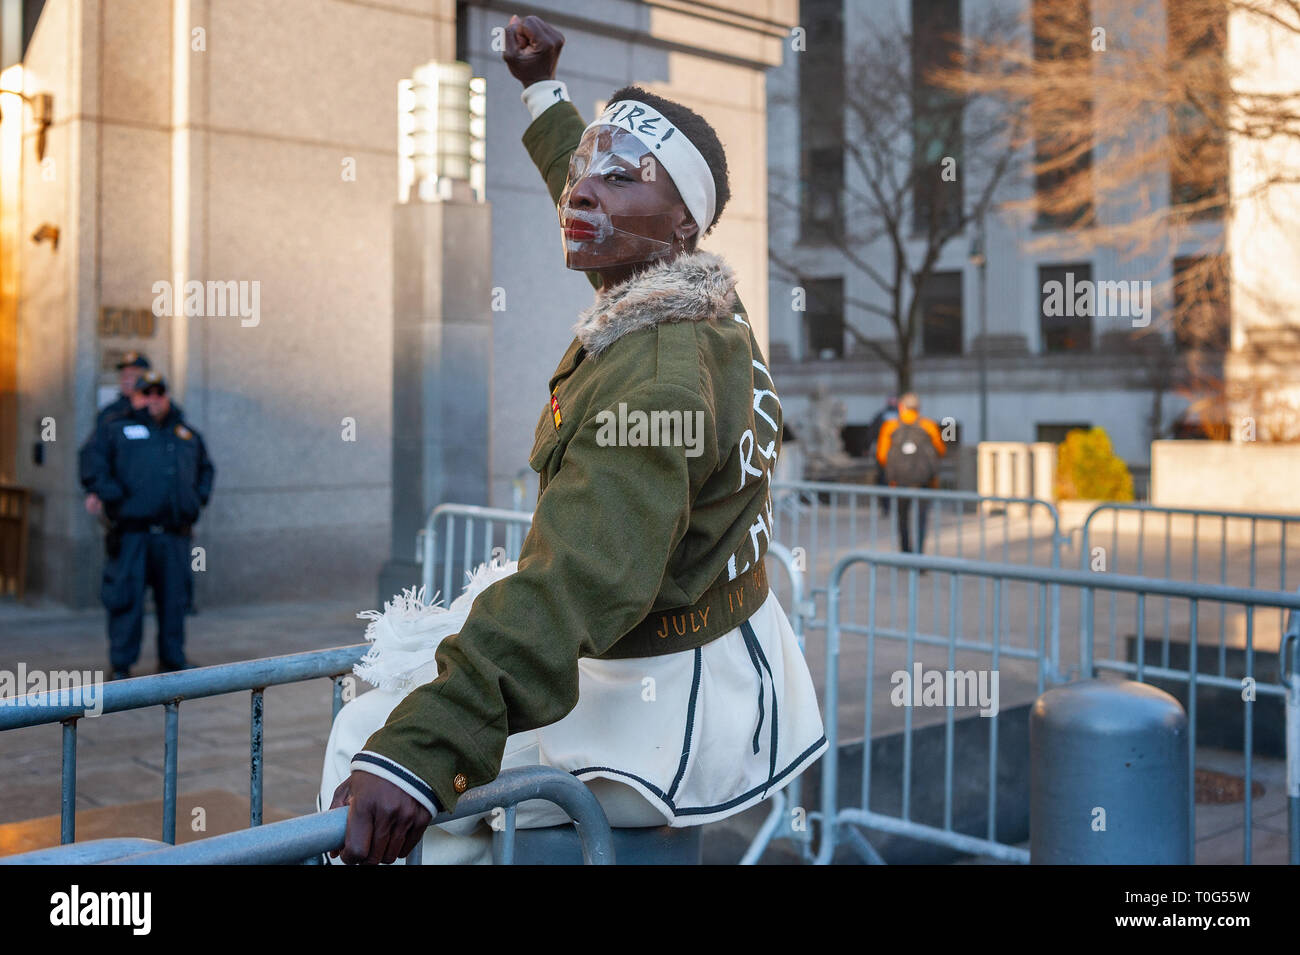 New York City, United States. 18th Mar, 2019. Today Patricia Okoumou, the activist who climbed the Statue of Liberty in July 2018 in protest of the Trump administration's zero-tolerance immigration policies was sentenced in the Southern District Court of New York In Manhattan to 5 years of probation. Before the sentencing, supporters gathered in a show of support alongside Ms. Okoumou who had covered her face in plastic tape to protest the limits imposed on her freedom of expression. Credit: Gabriele Holtermann Gorden/Pacific Press/Alamy Live News Stock Photo